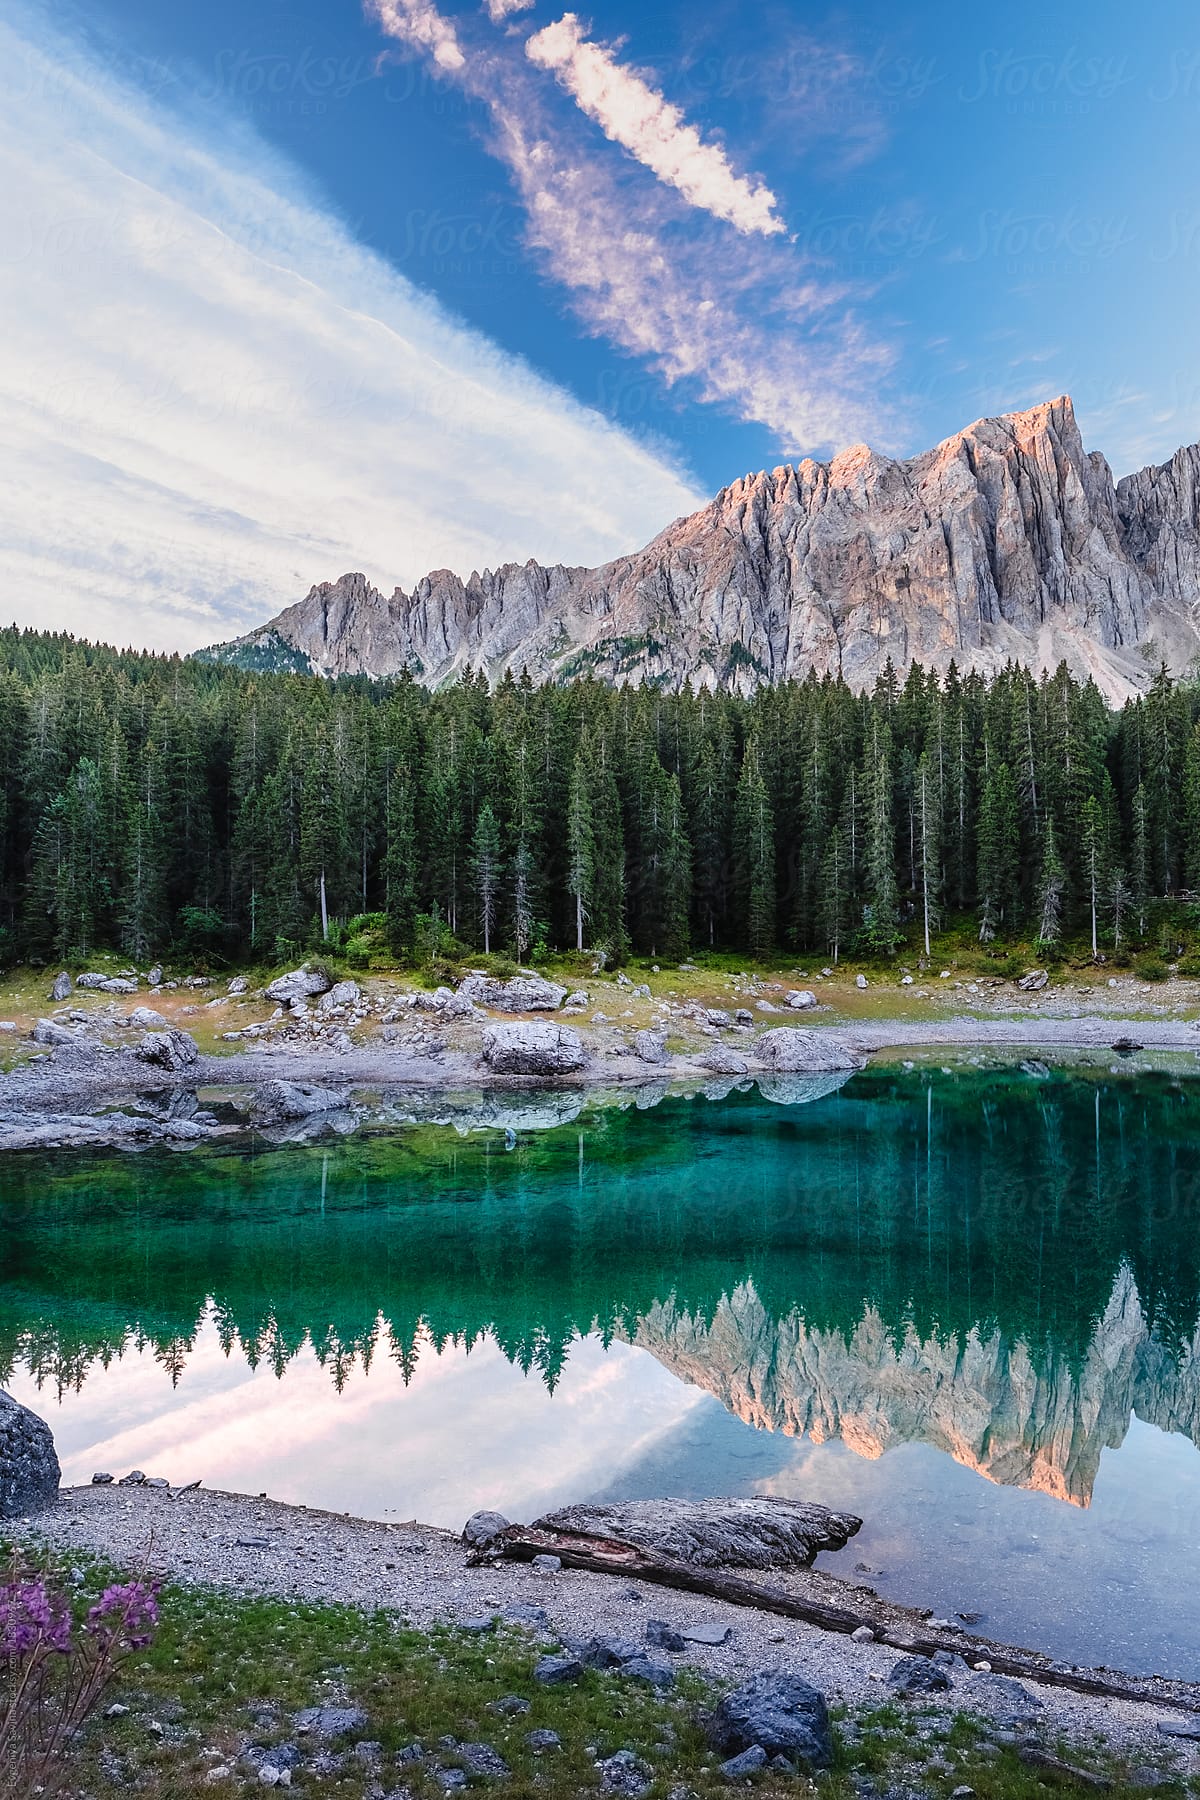 An italian mountain crystal clear lake with mountains at the background and still calm bank at the front